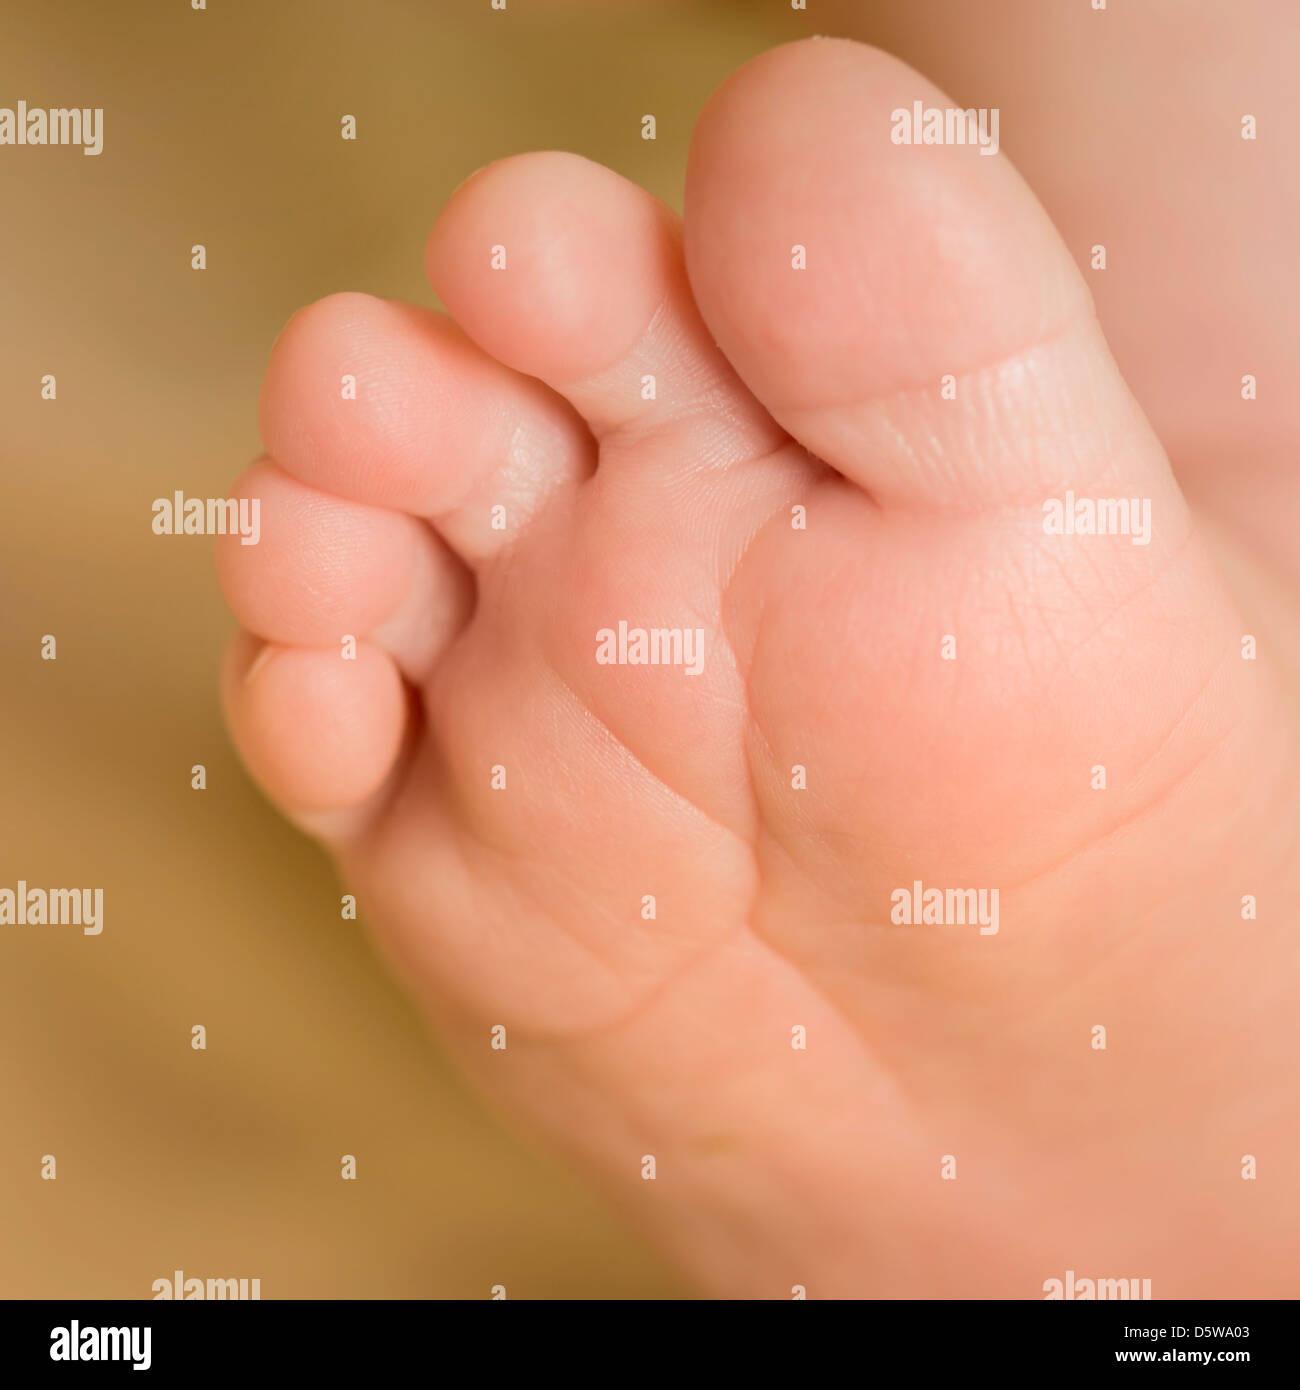 Toes of a two week old baby Stock Photo